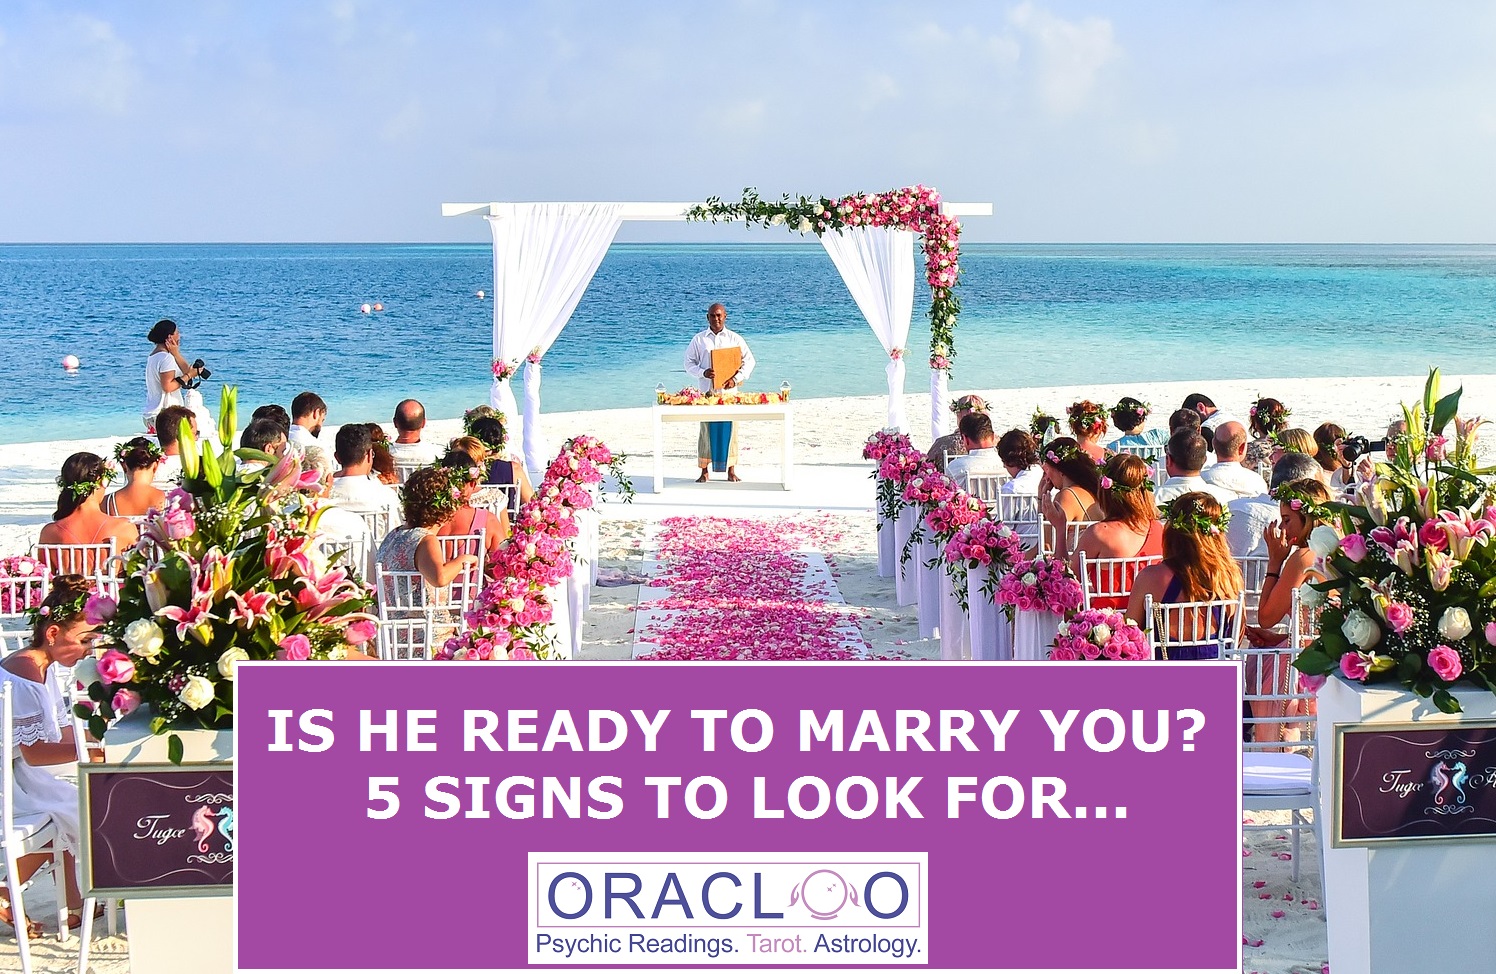 IS HE READY TO MARRY YOU 5 SIGNS TO LOOK FOR